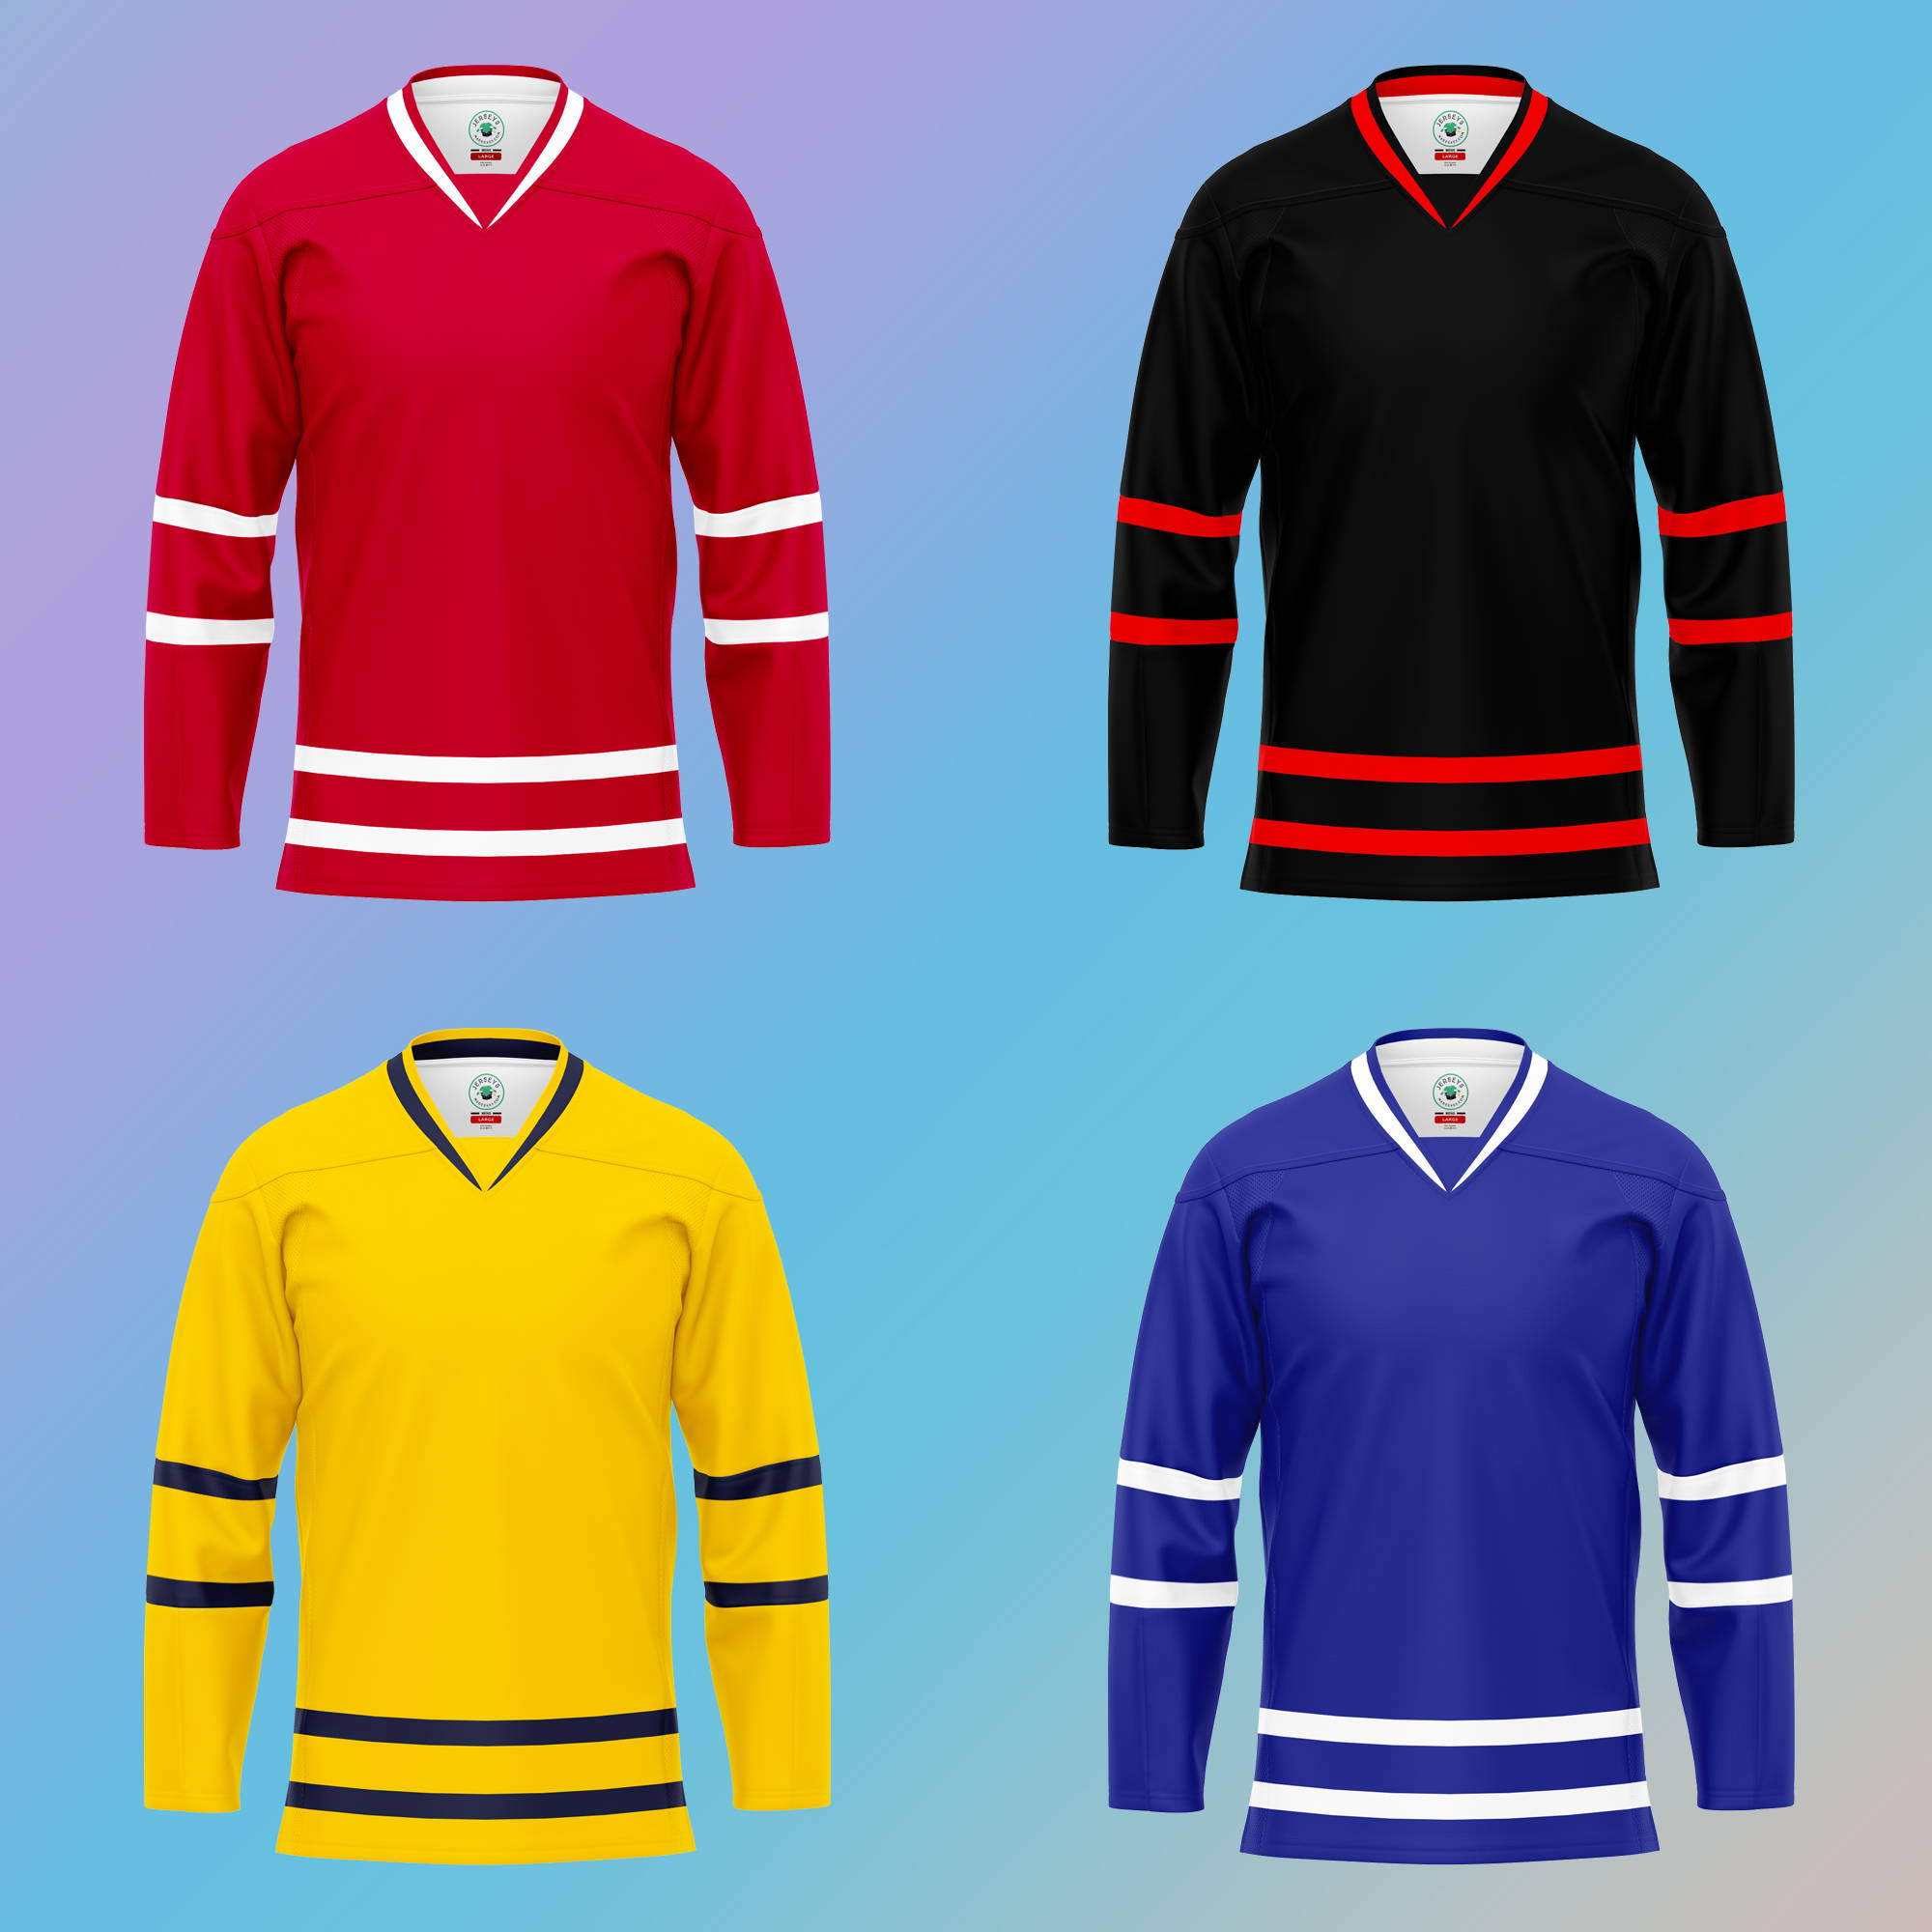 Lace Neck Hockey Jersey Mockup designs, themes, templates and